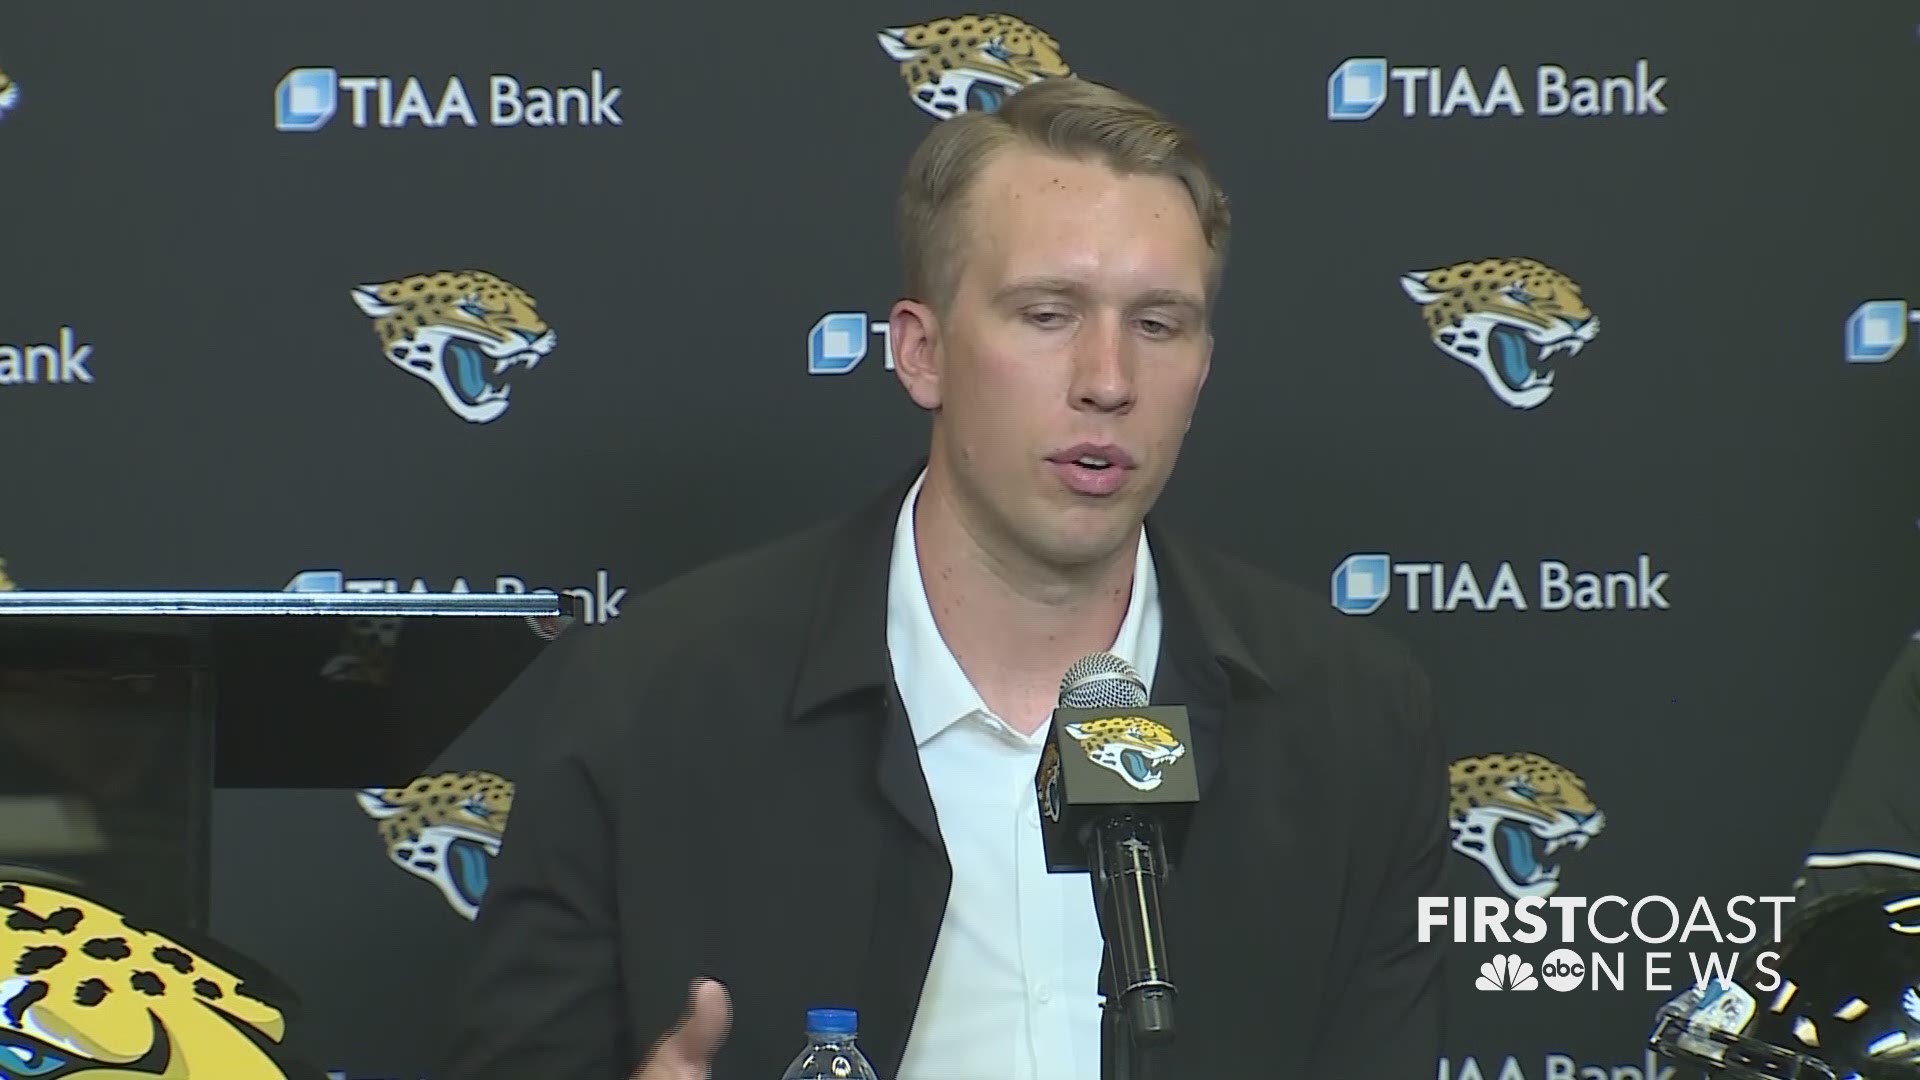 Nick Foles says this is his first opportunity to wear his old high school number.